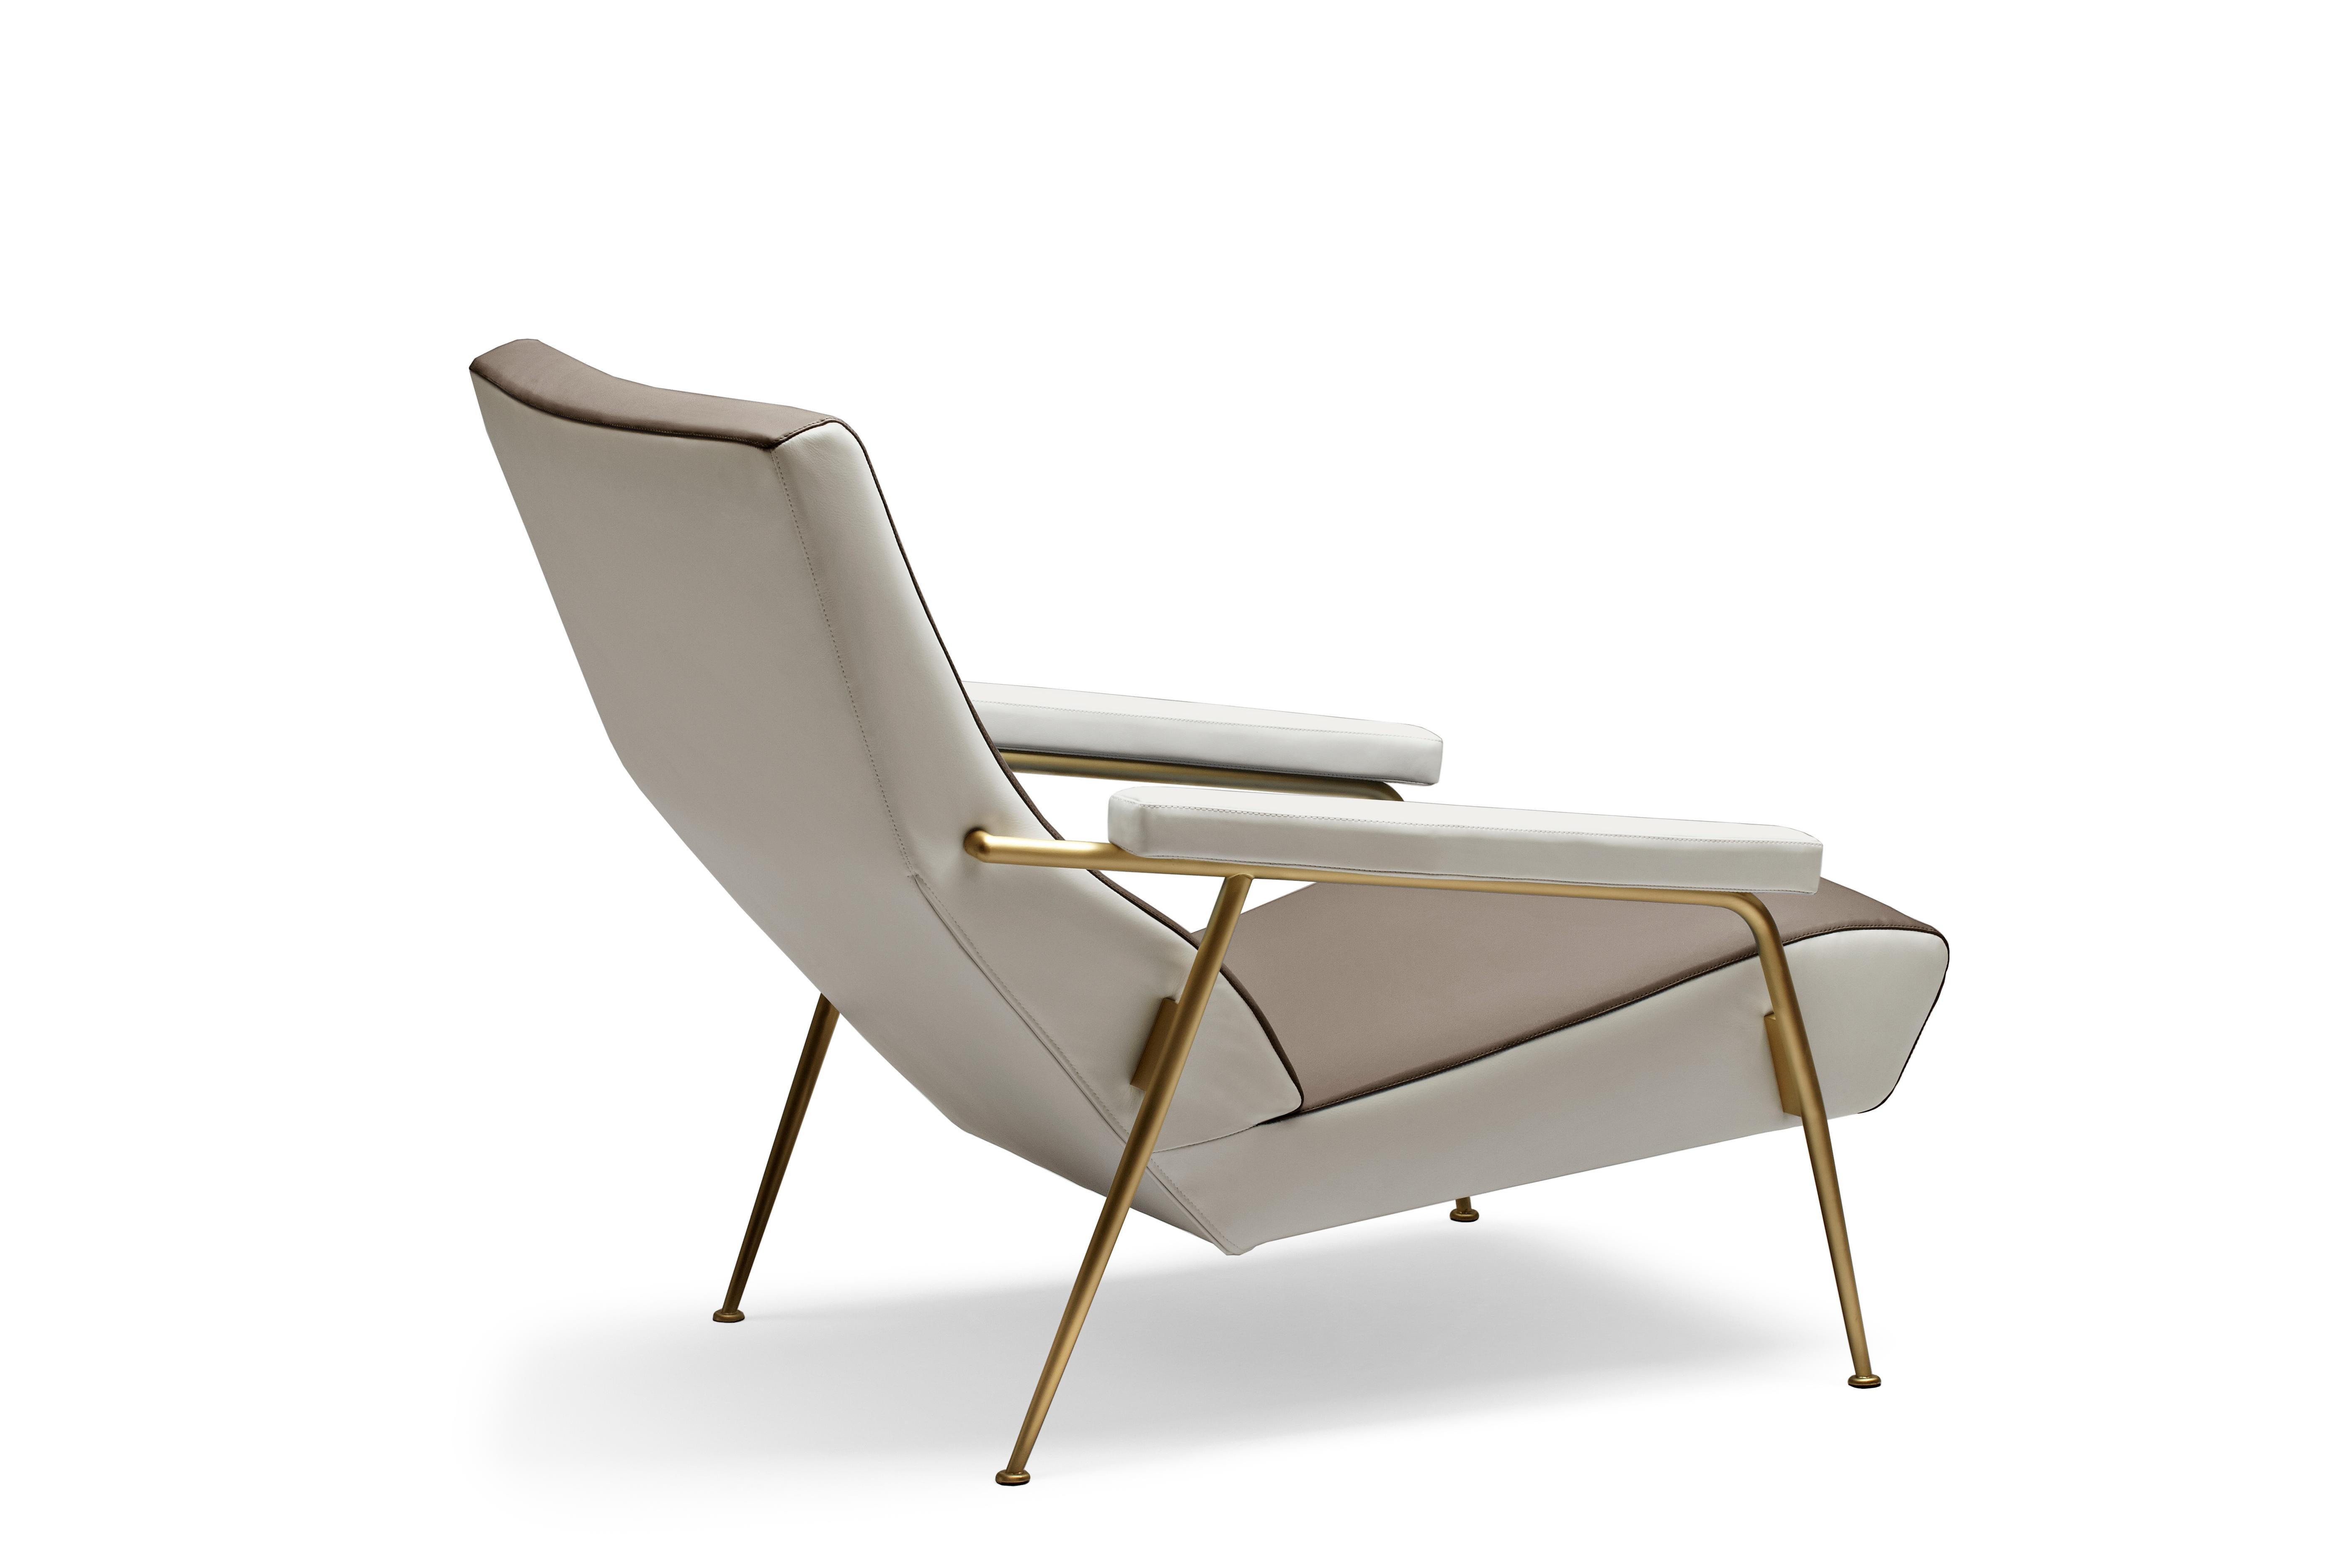 For Sale: Beige (S1211-1222_Paper White / Sand) Armchair in Leather and Steel Molteni&C by Gio Ponti - D.153.1 -made in Italy 2